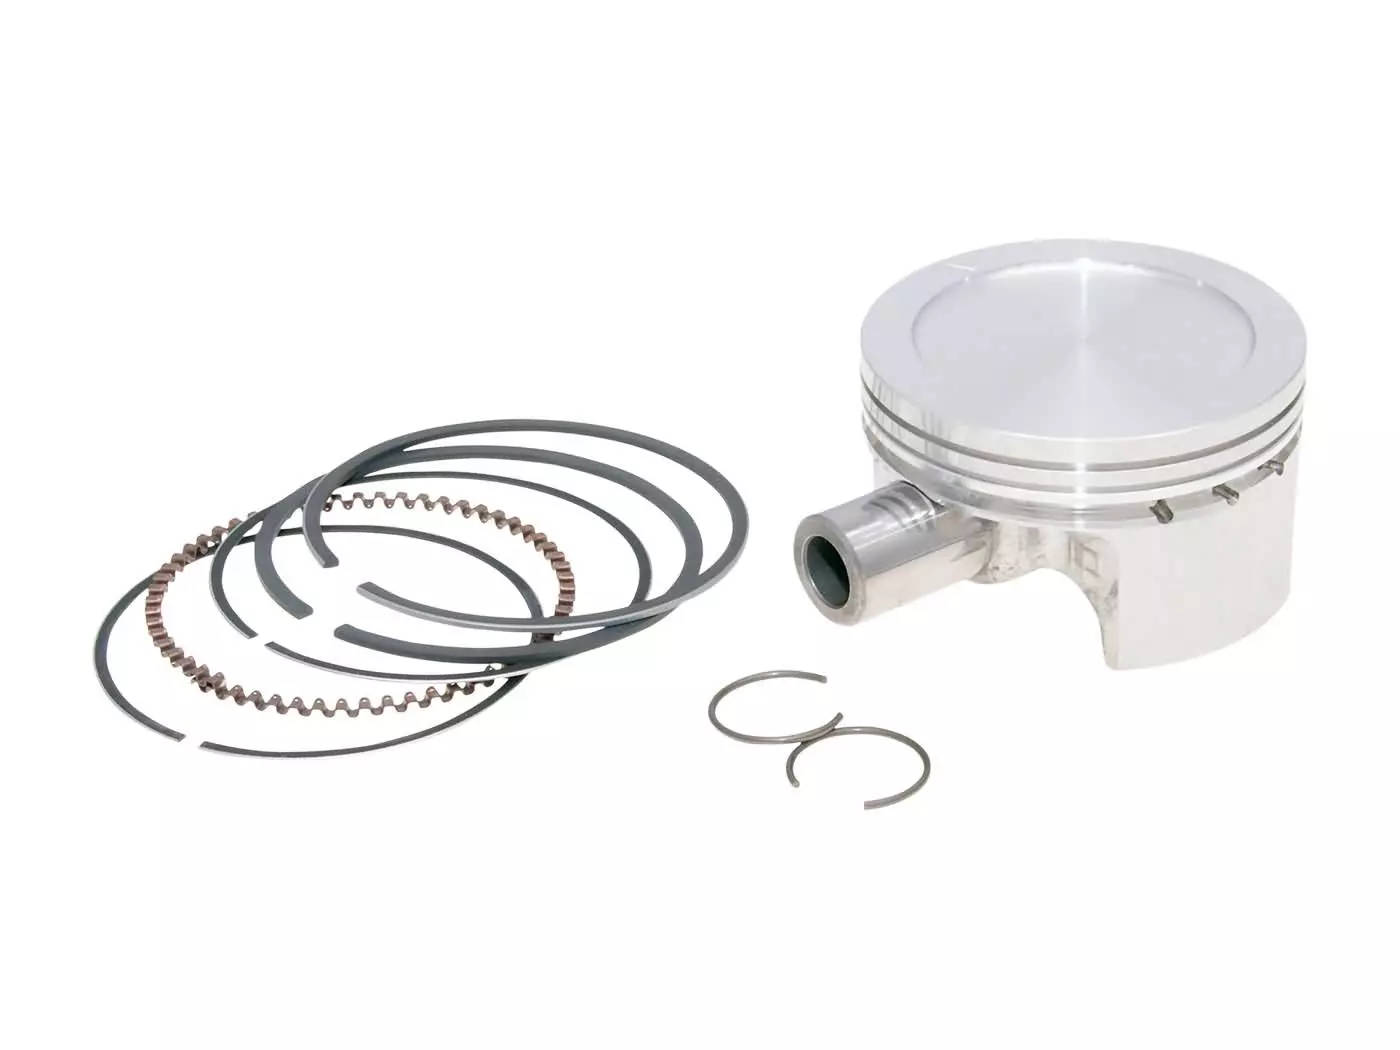 Piston Kit Polini 80cc 50mm (A) For GY6 China Scooter, Kymco 4-stroke, 139QMB / QMA